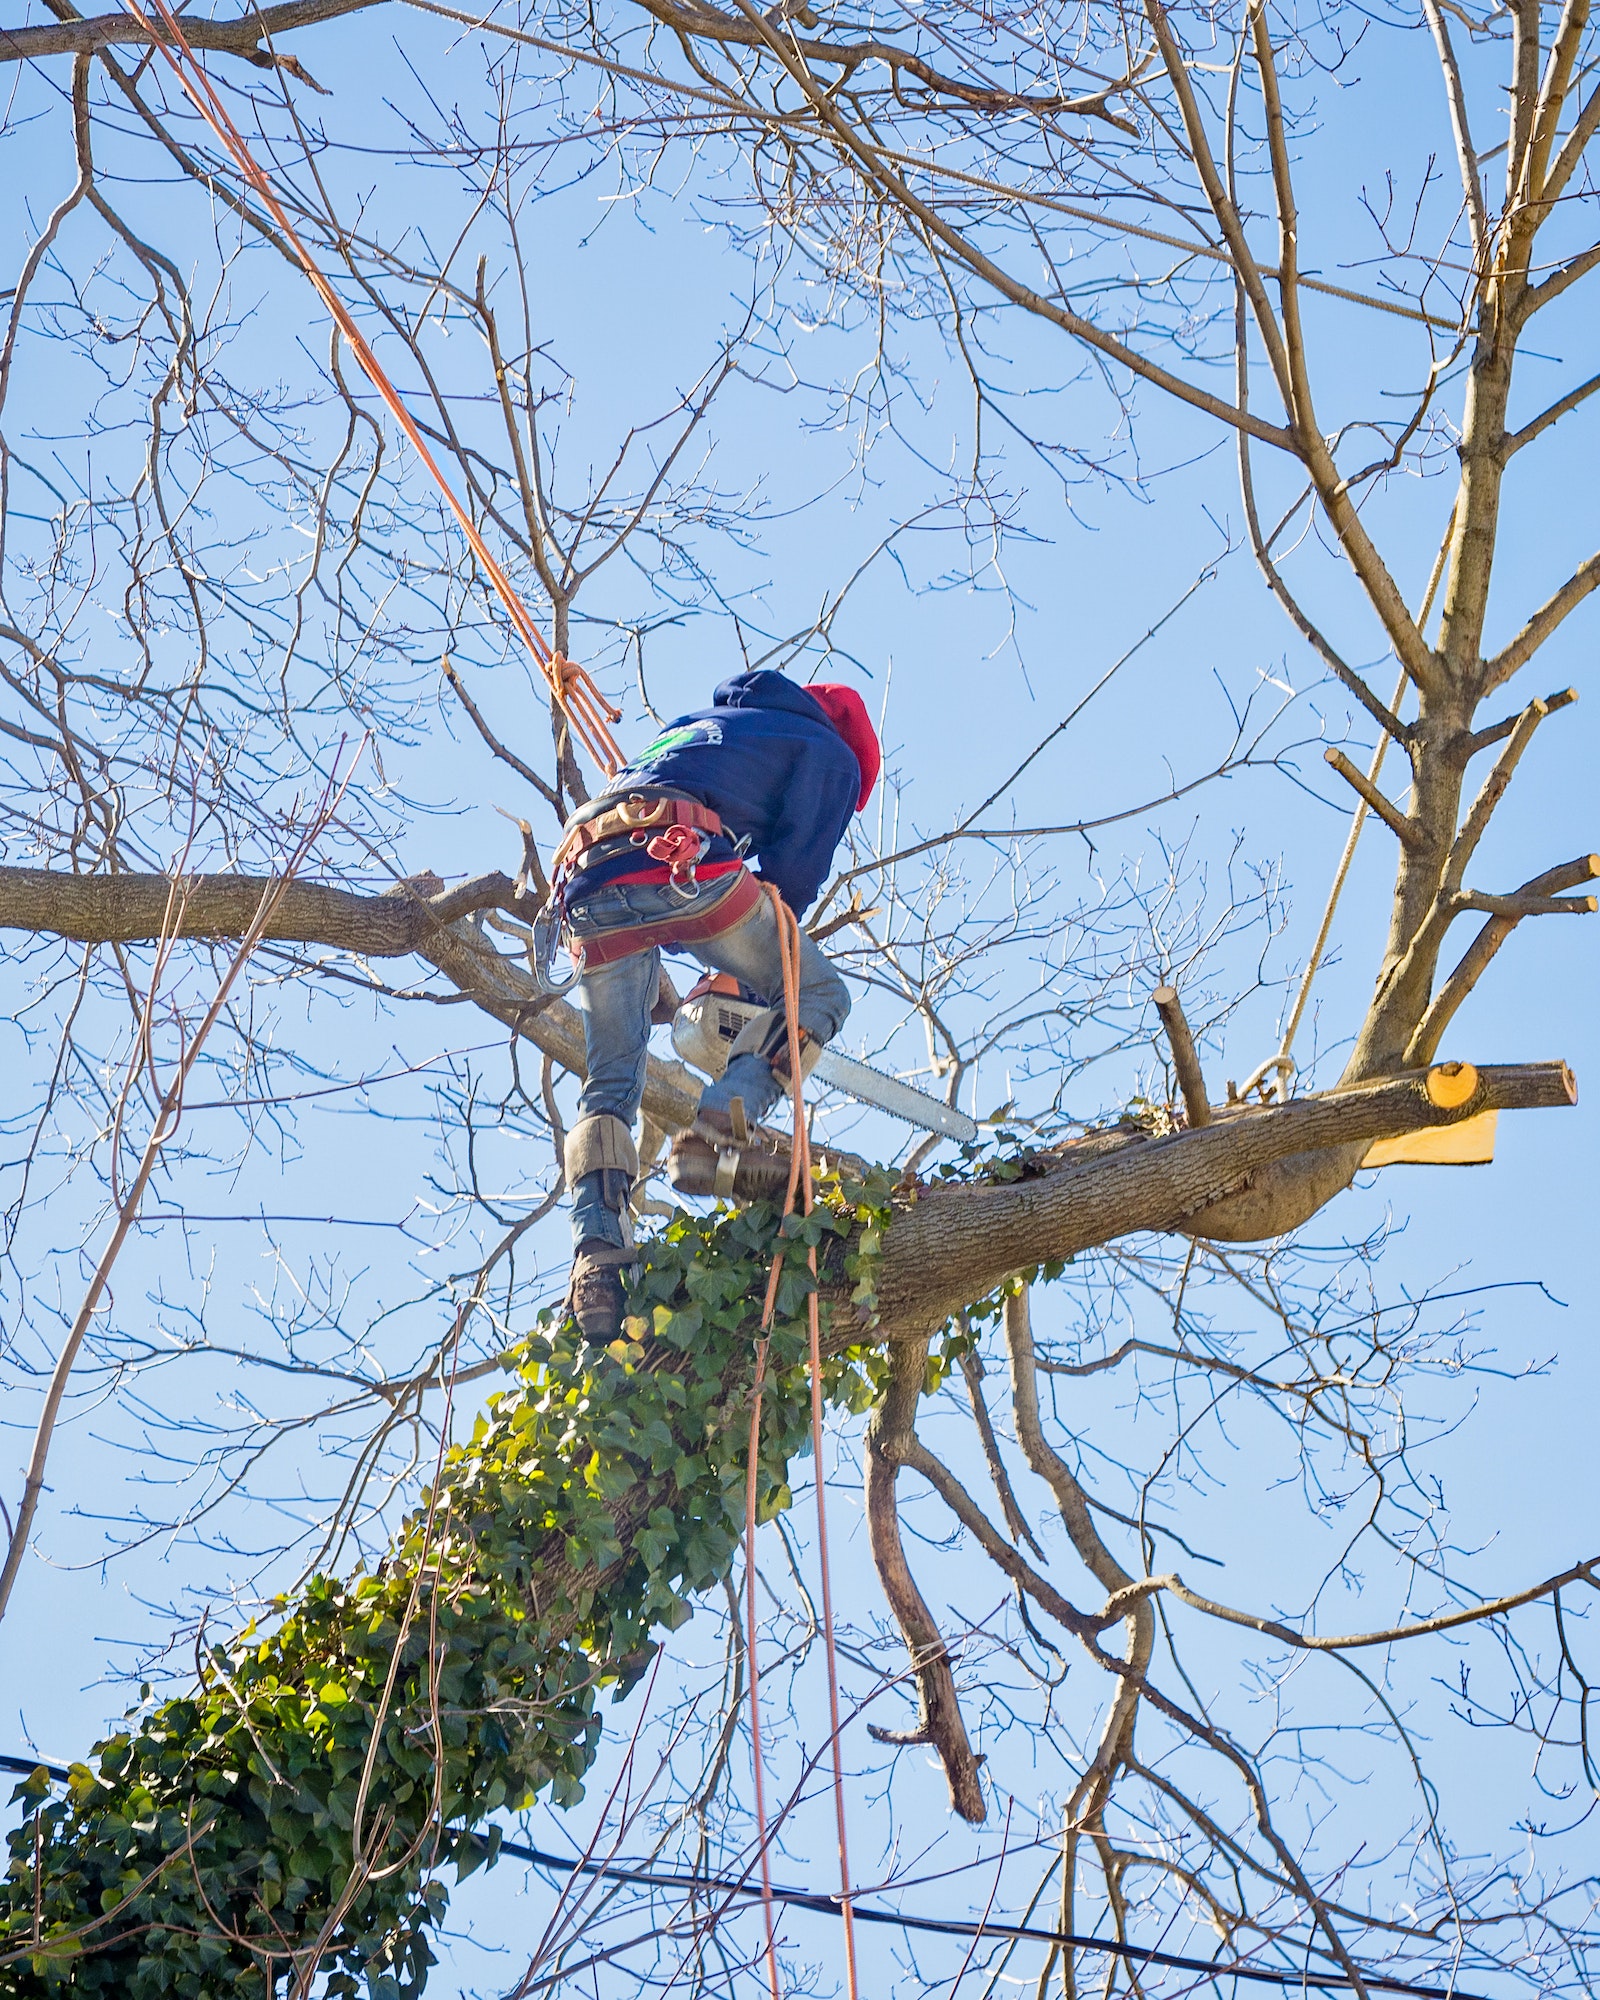 tree-service-worker-arborist-pruning-large-branches-and-cutting-down-large-maple-tree-with-chainsaw.jpg